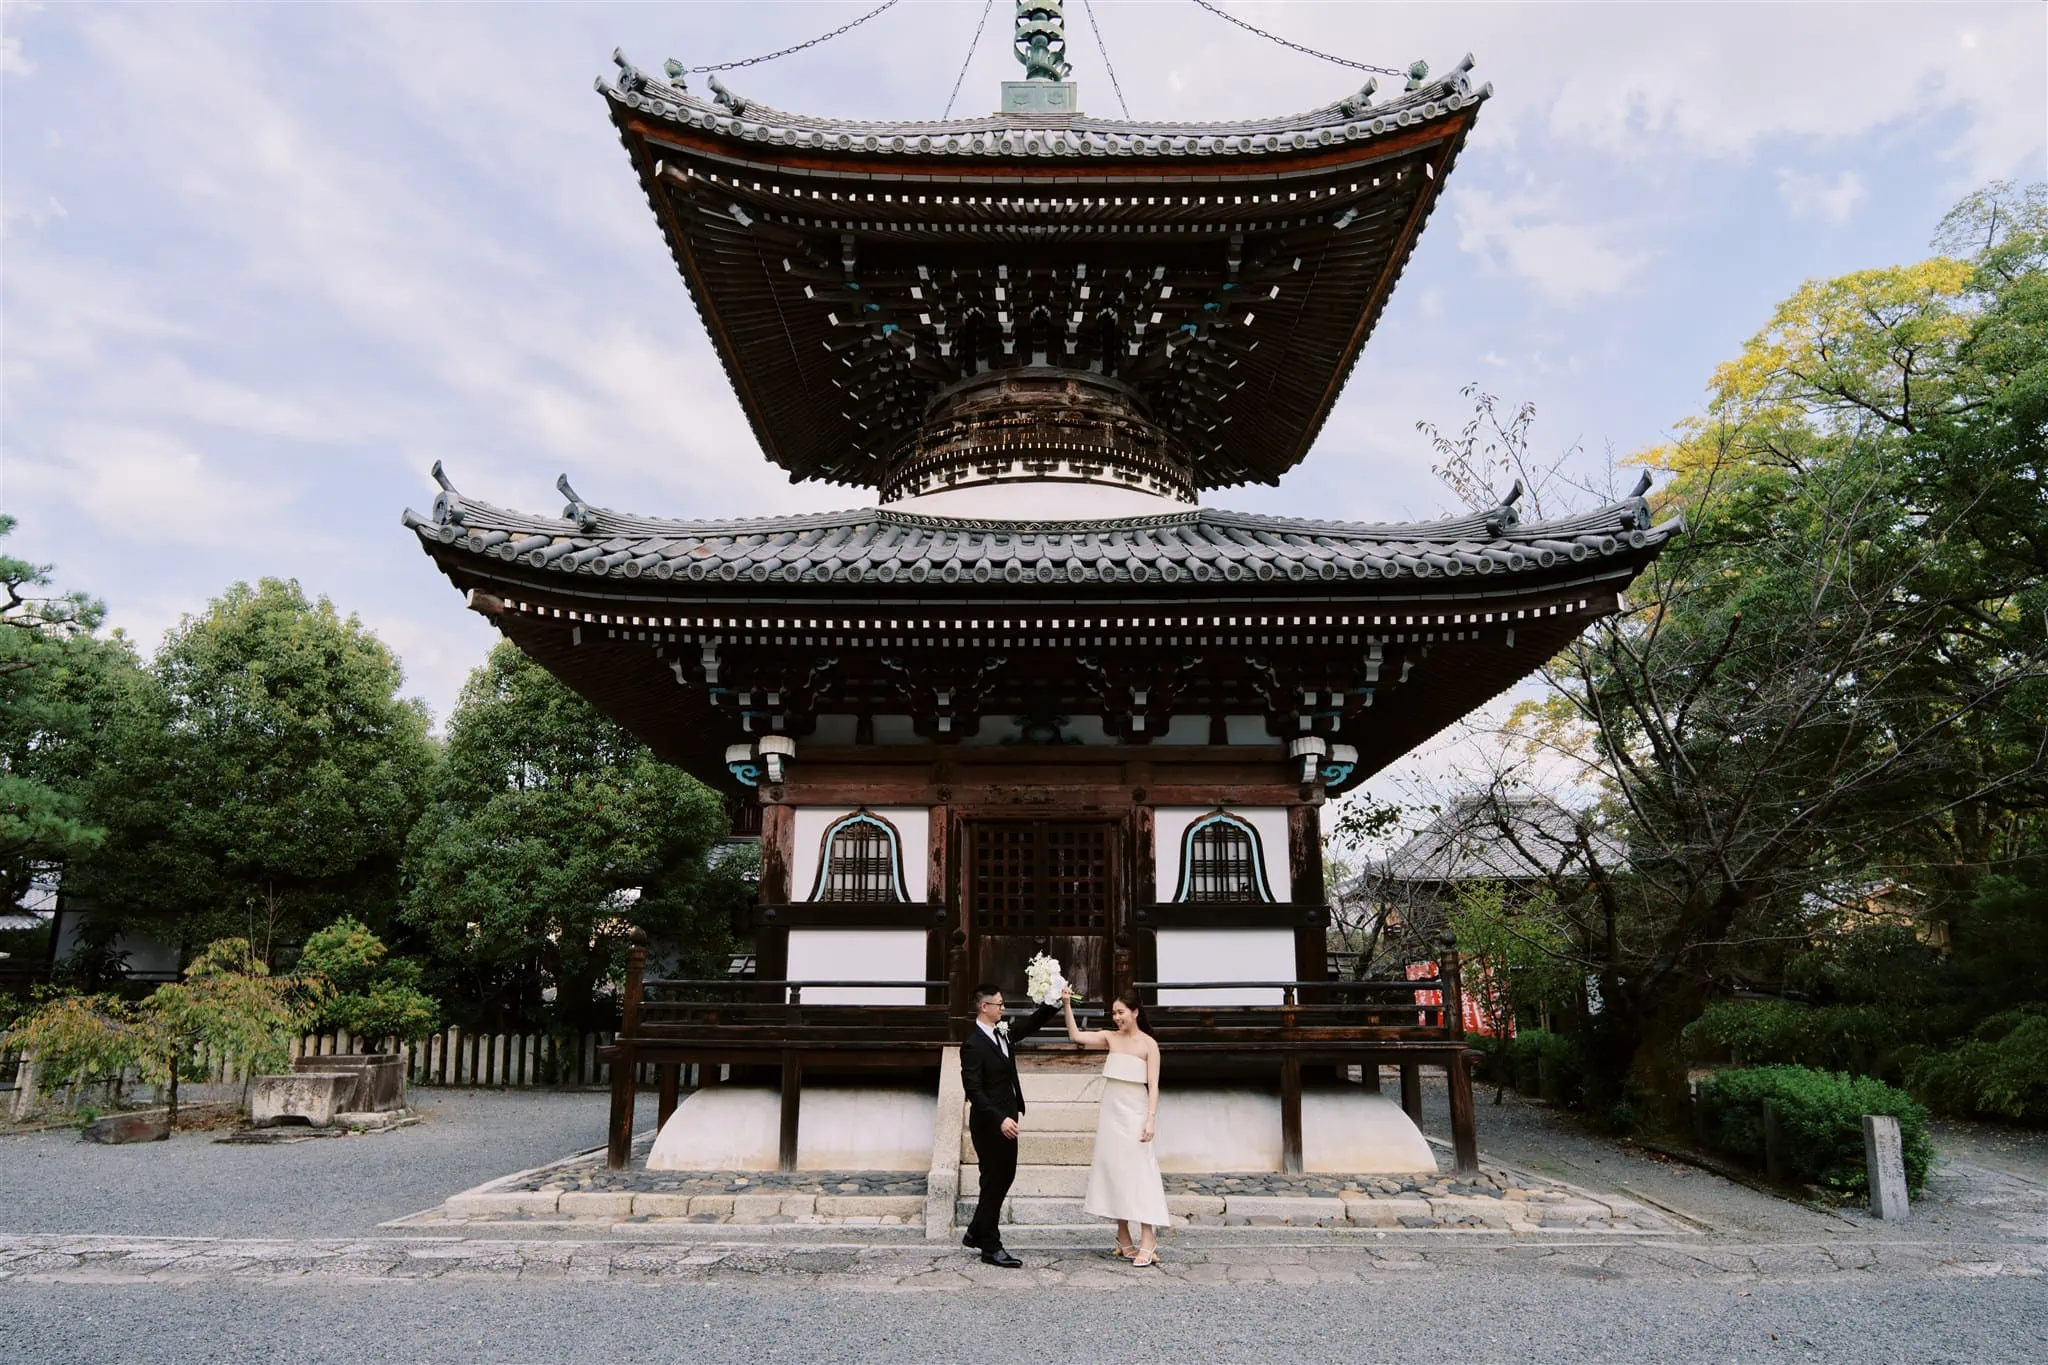 Kyoto Tokyo Japan Elopement Wedding Photographer, Planner & Videographer | A Japanese bride and groom eloping in front of a pagoda.